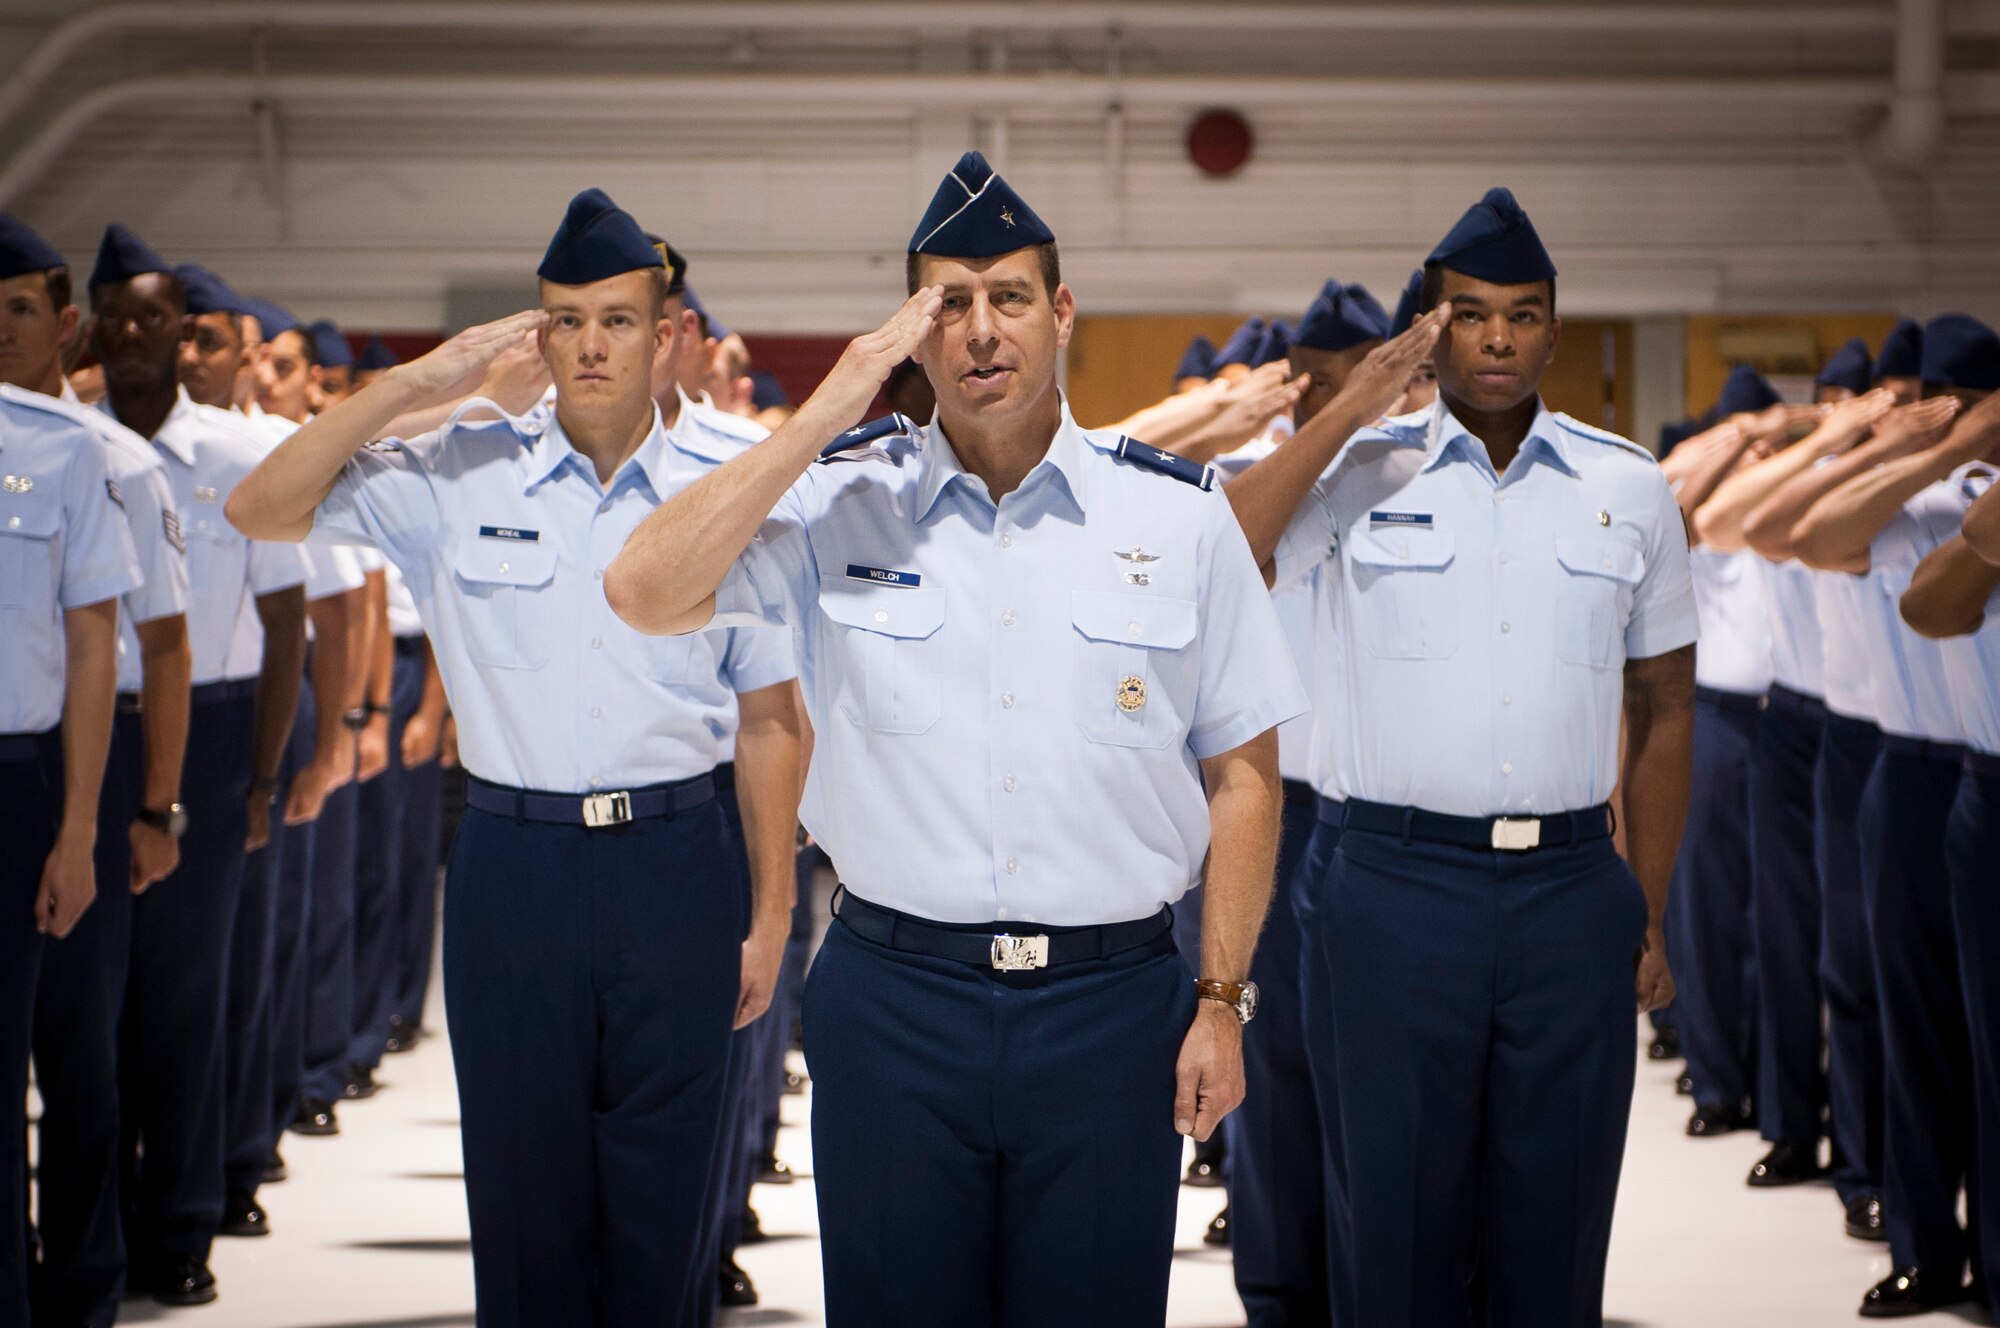 Brig. Gen. Paul Welch, U.S. Air Force Warfare Center vice commander, leads a formation comprised of Airmen representing various units across Nellis Air Force Base in rendering a traditional first salute during a change of command ceremony July 13, 2017, at Nellis AFB, Nev. The USAFWC exists to ensure deployed forces are well trained and well equipped to conduct integrated combat operations. (U.S. Air Force photo by Senior Airman Joshua Kleinholz)